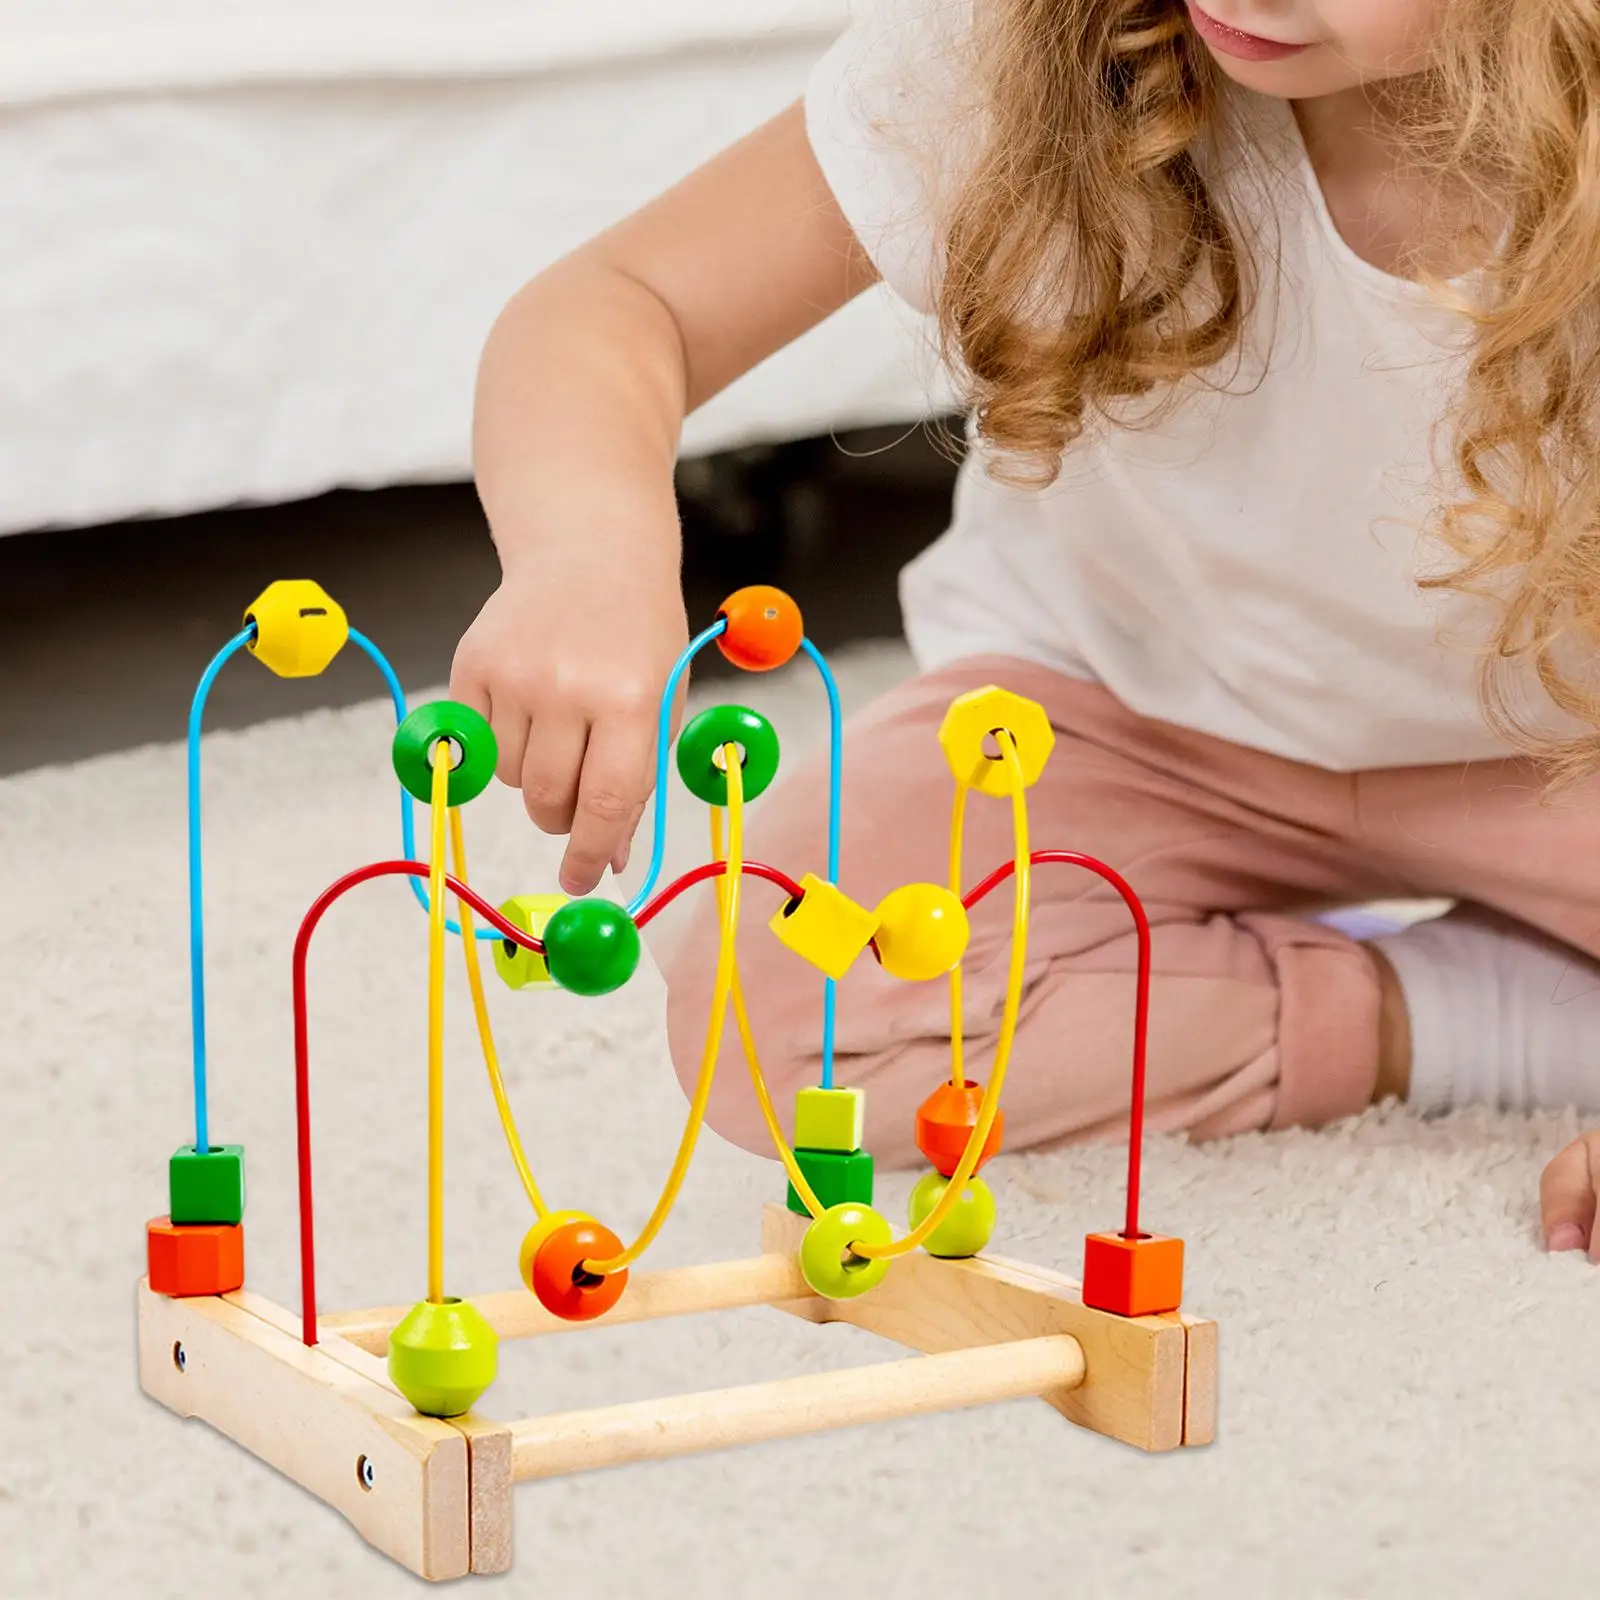 Bead Toy Training Child Attention Ability Developmental Toy for Baby